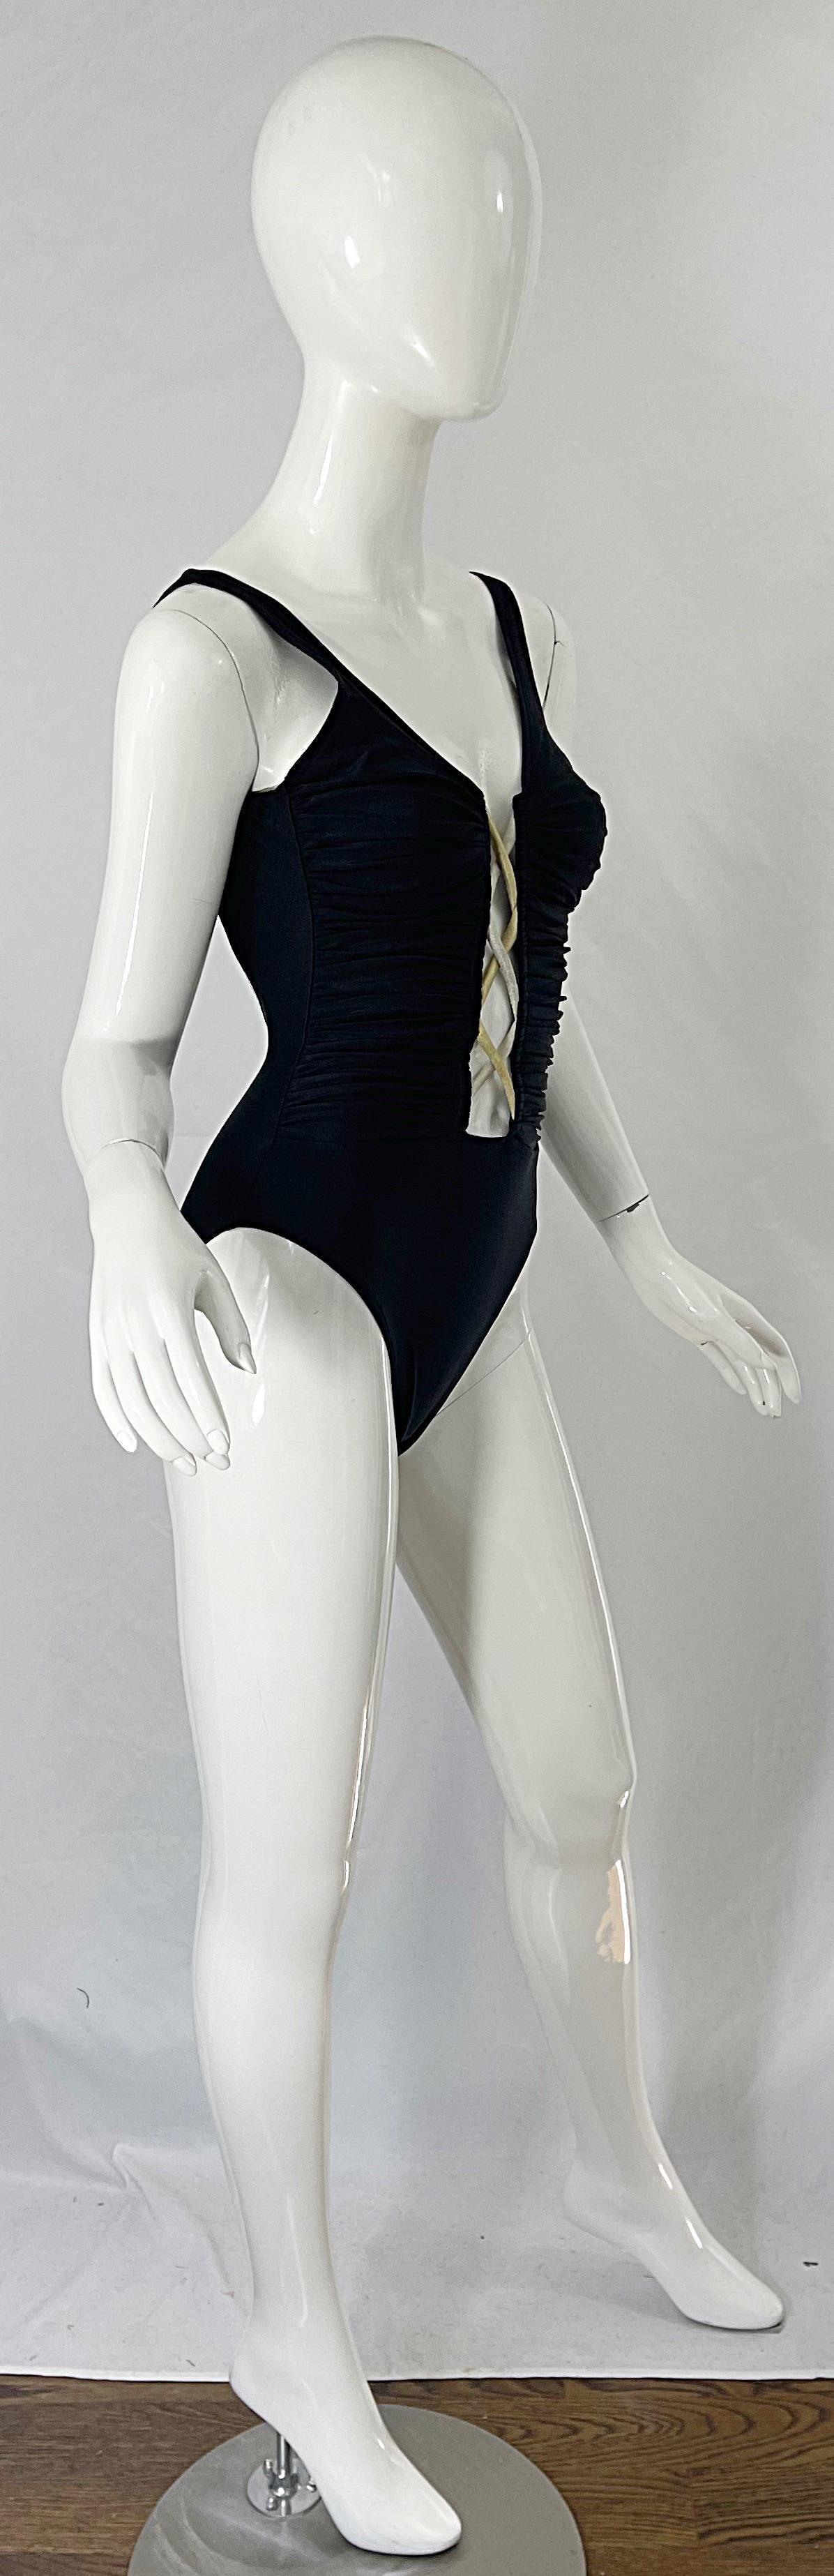 Bill Blass 1990s Black Sexy Cut Out Size 6 / 8 One Piece 90s Swimsuit Bodysuit For Sale 5